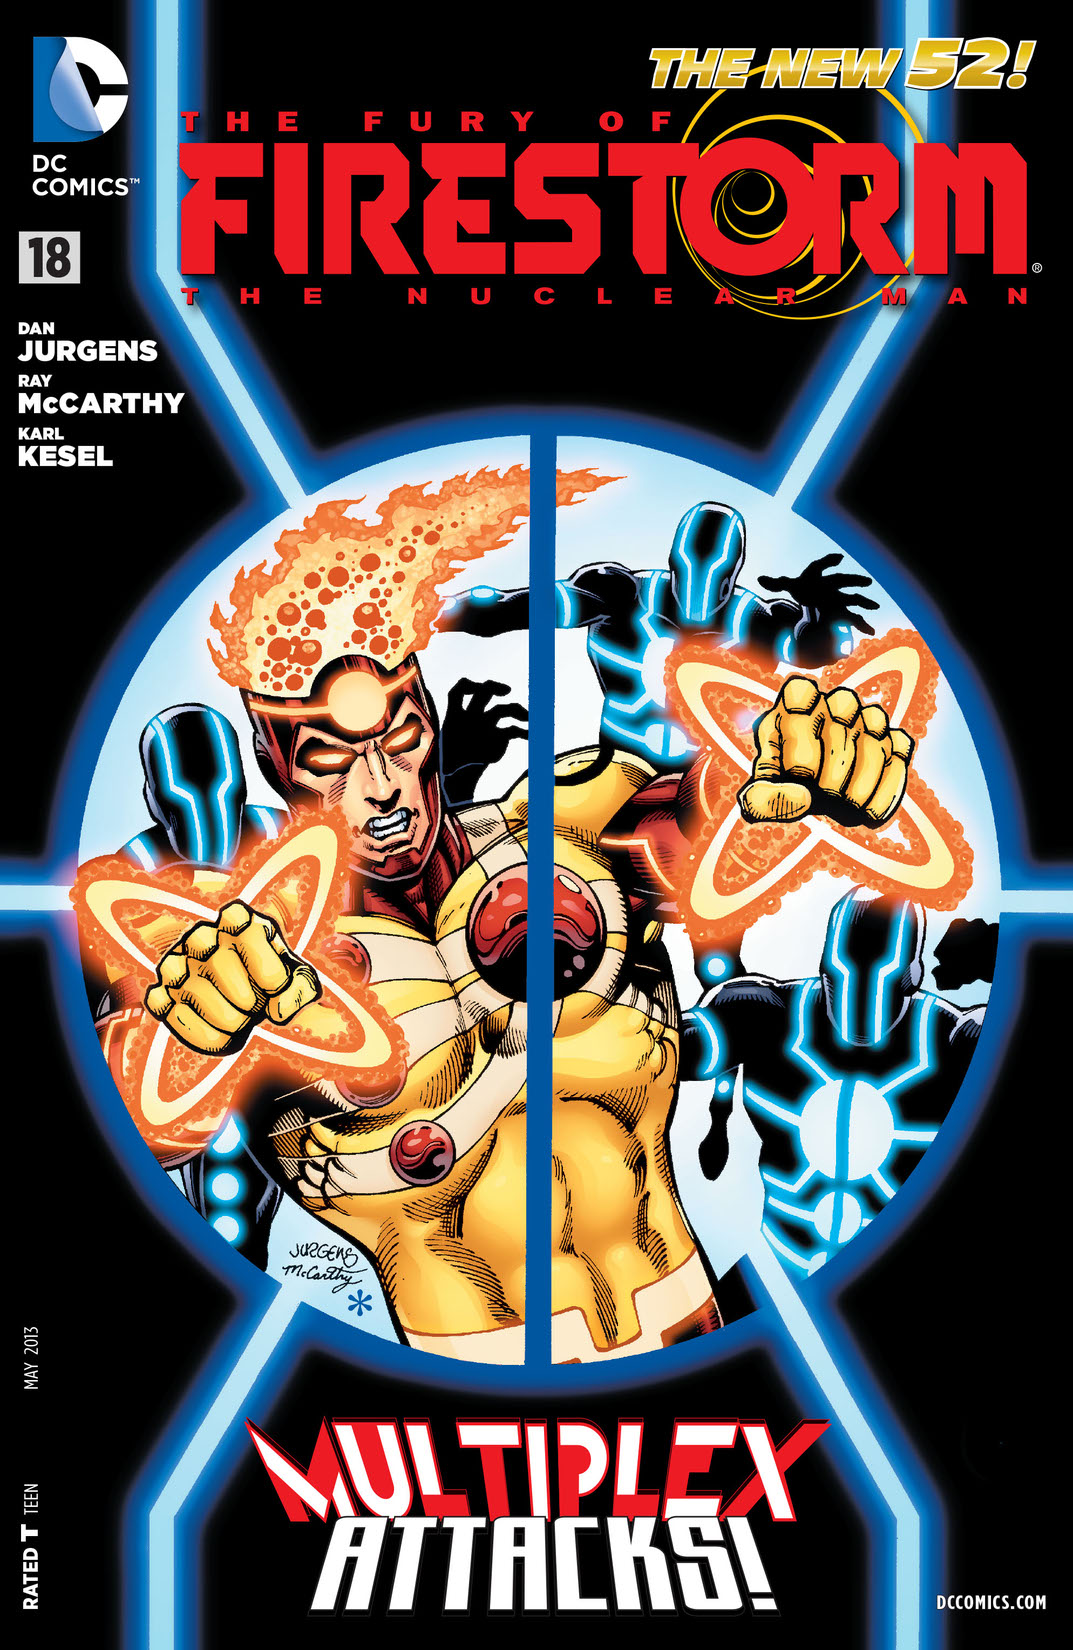 The Fury of Firestorm: The Nuclear Man #18 preview images